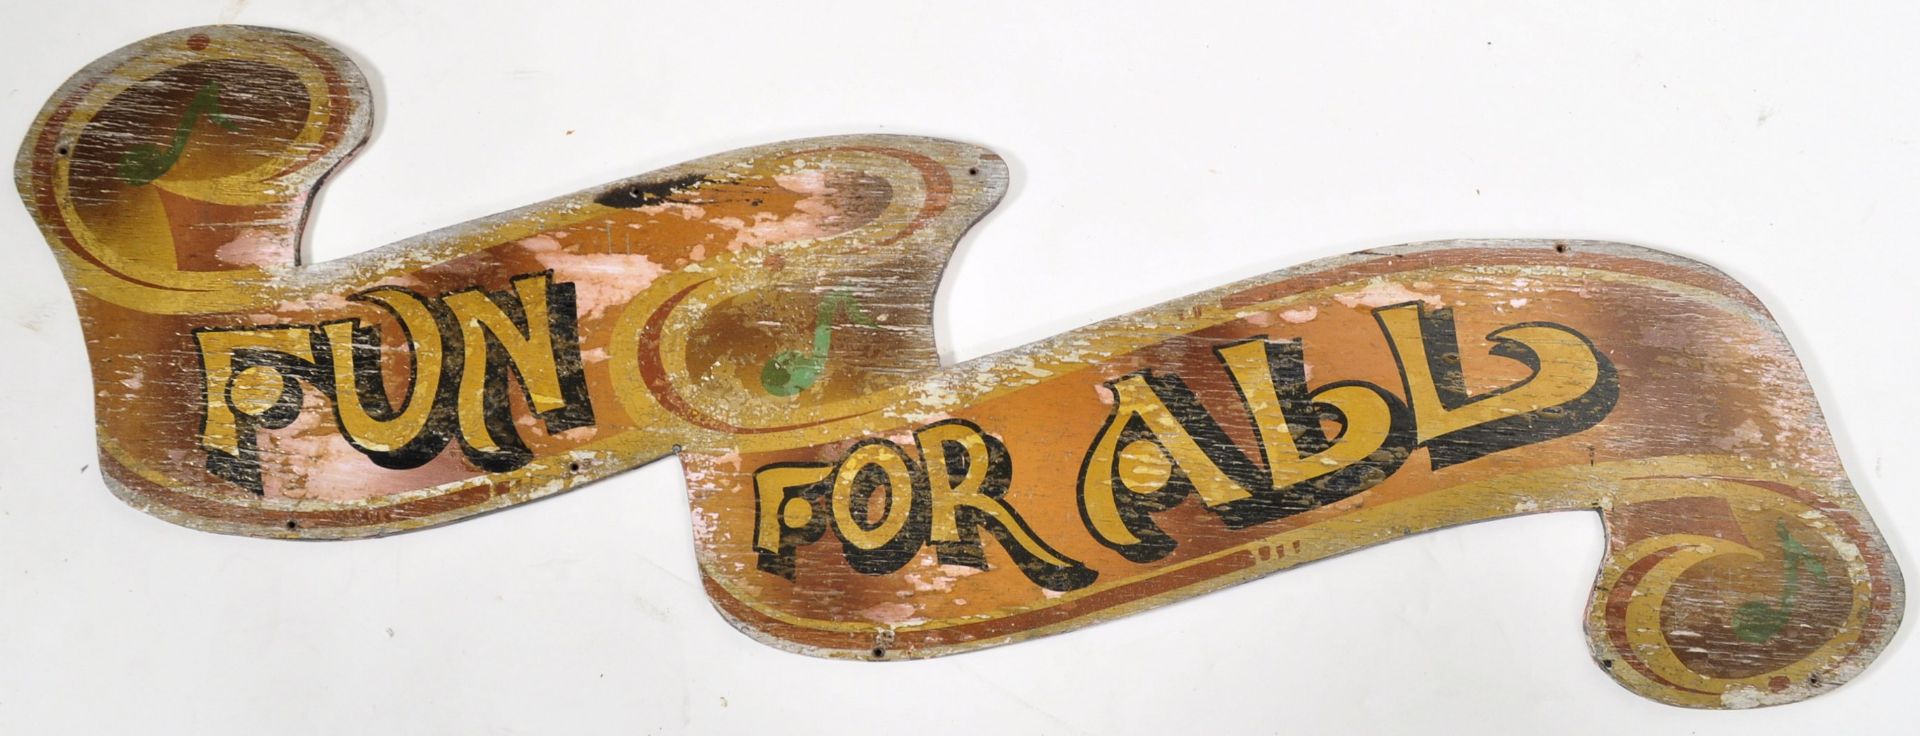 FUN FOR ALL - EARLY 20TH CENTURY FAIRGROUND PAINTED SIGN